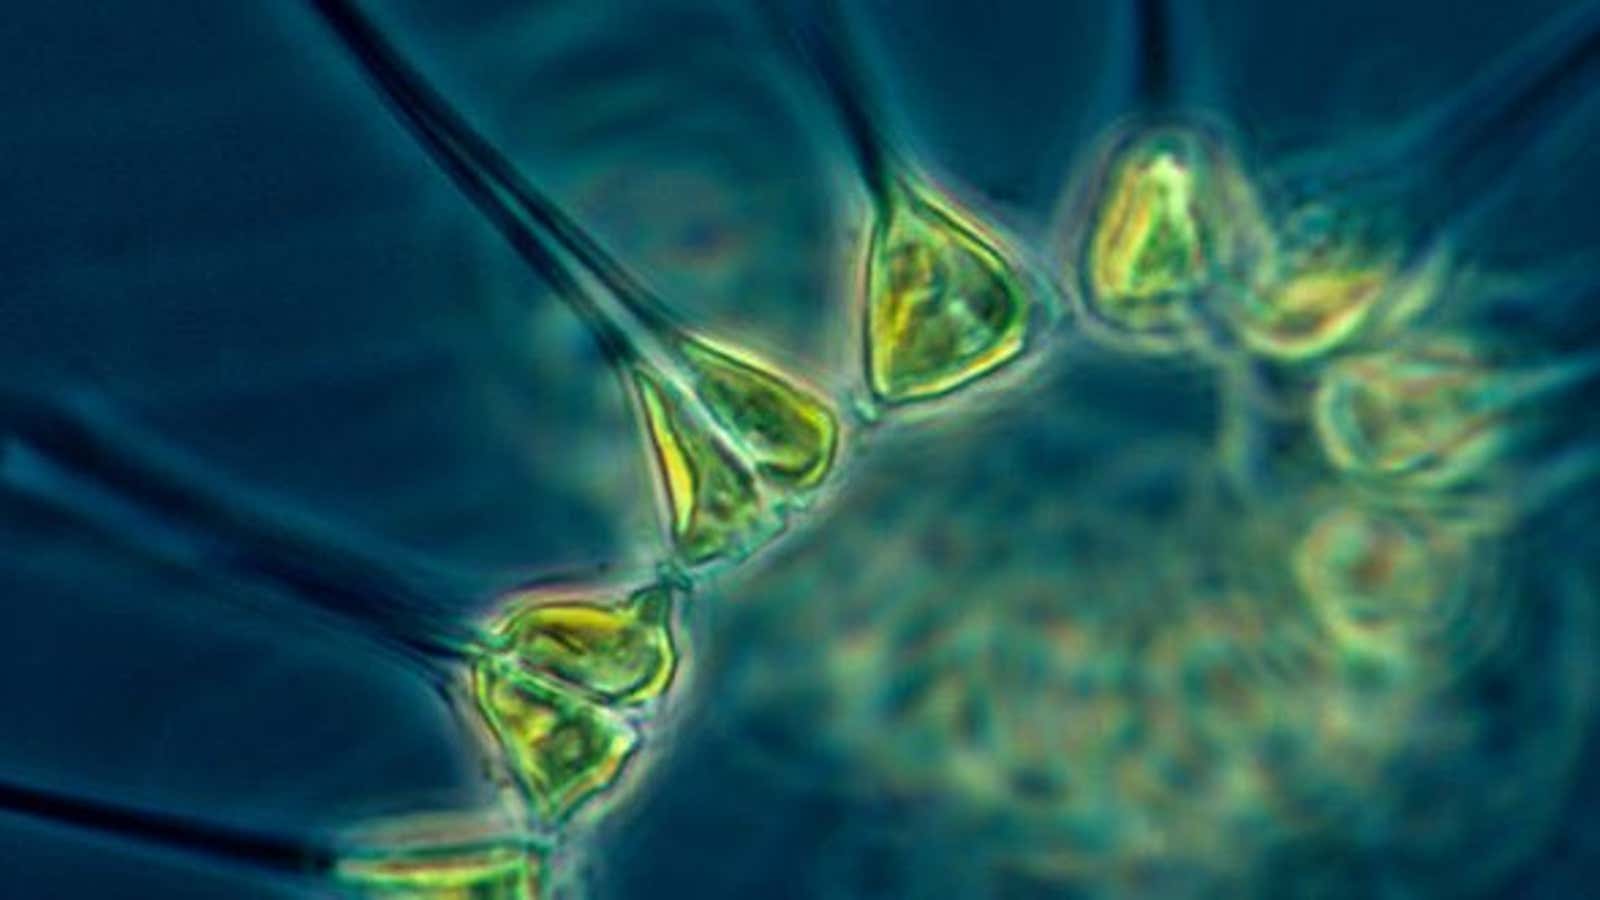 Marine phytoplankton are responsible for 50% of all oxygen production on Earth.